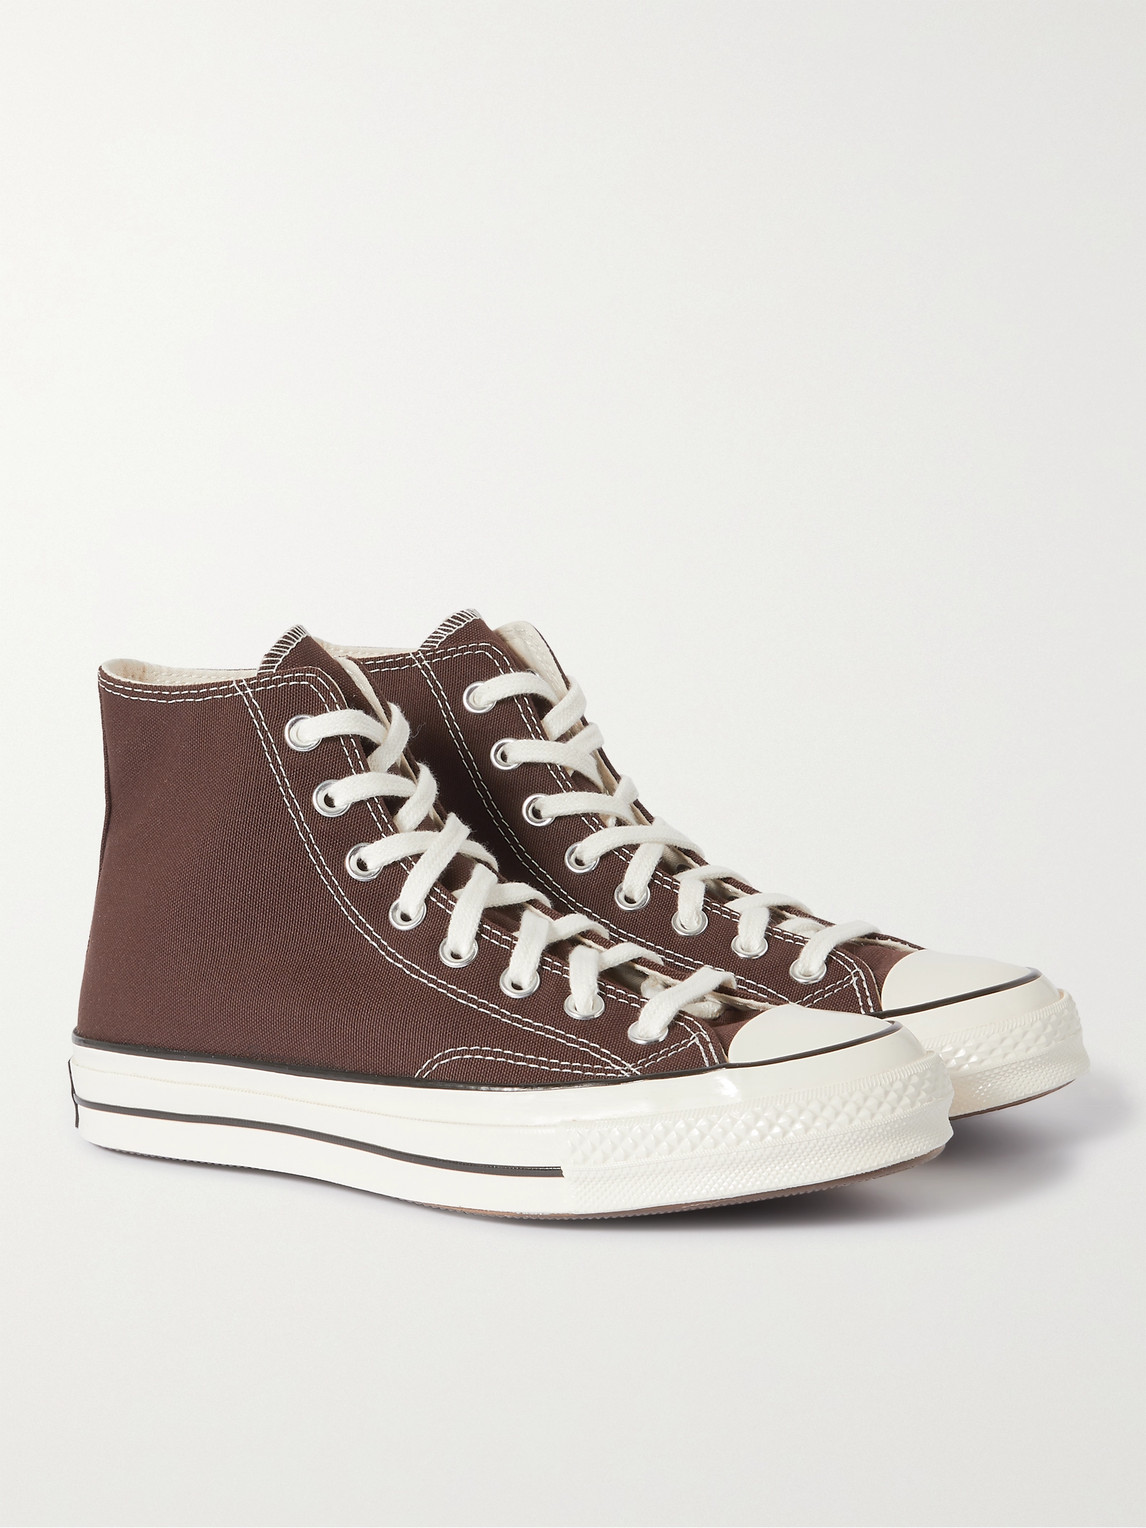 CONVERSE CHUCK TAYLOR ALL STAR 70 CANVAS HIGH-TOP SNEAKERS